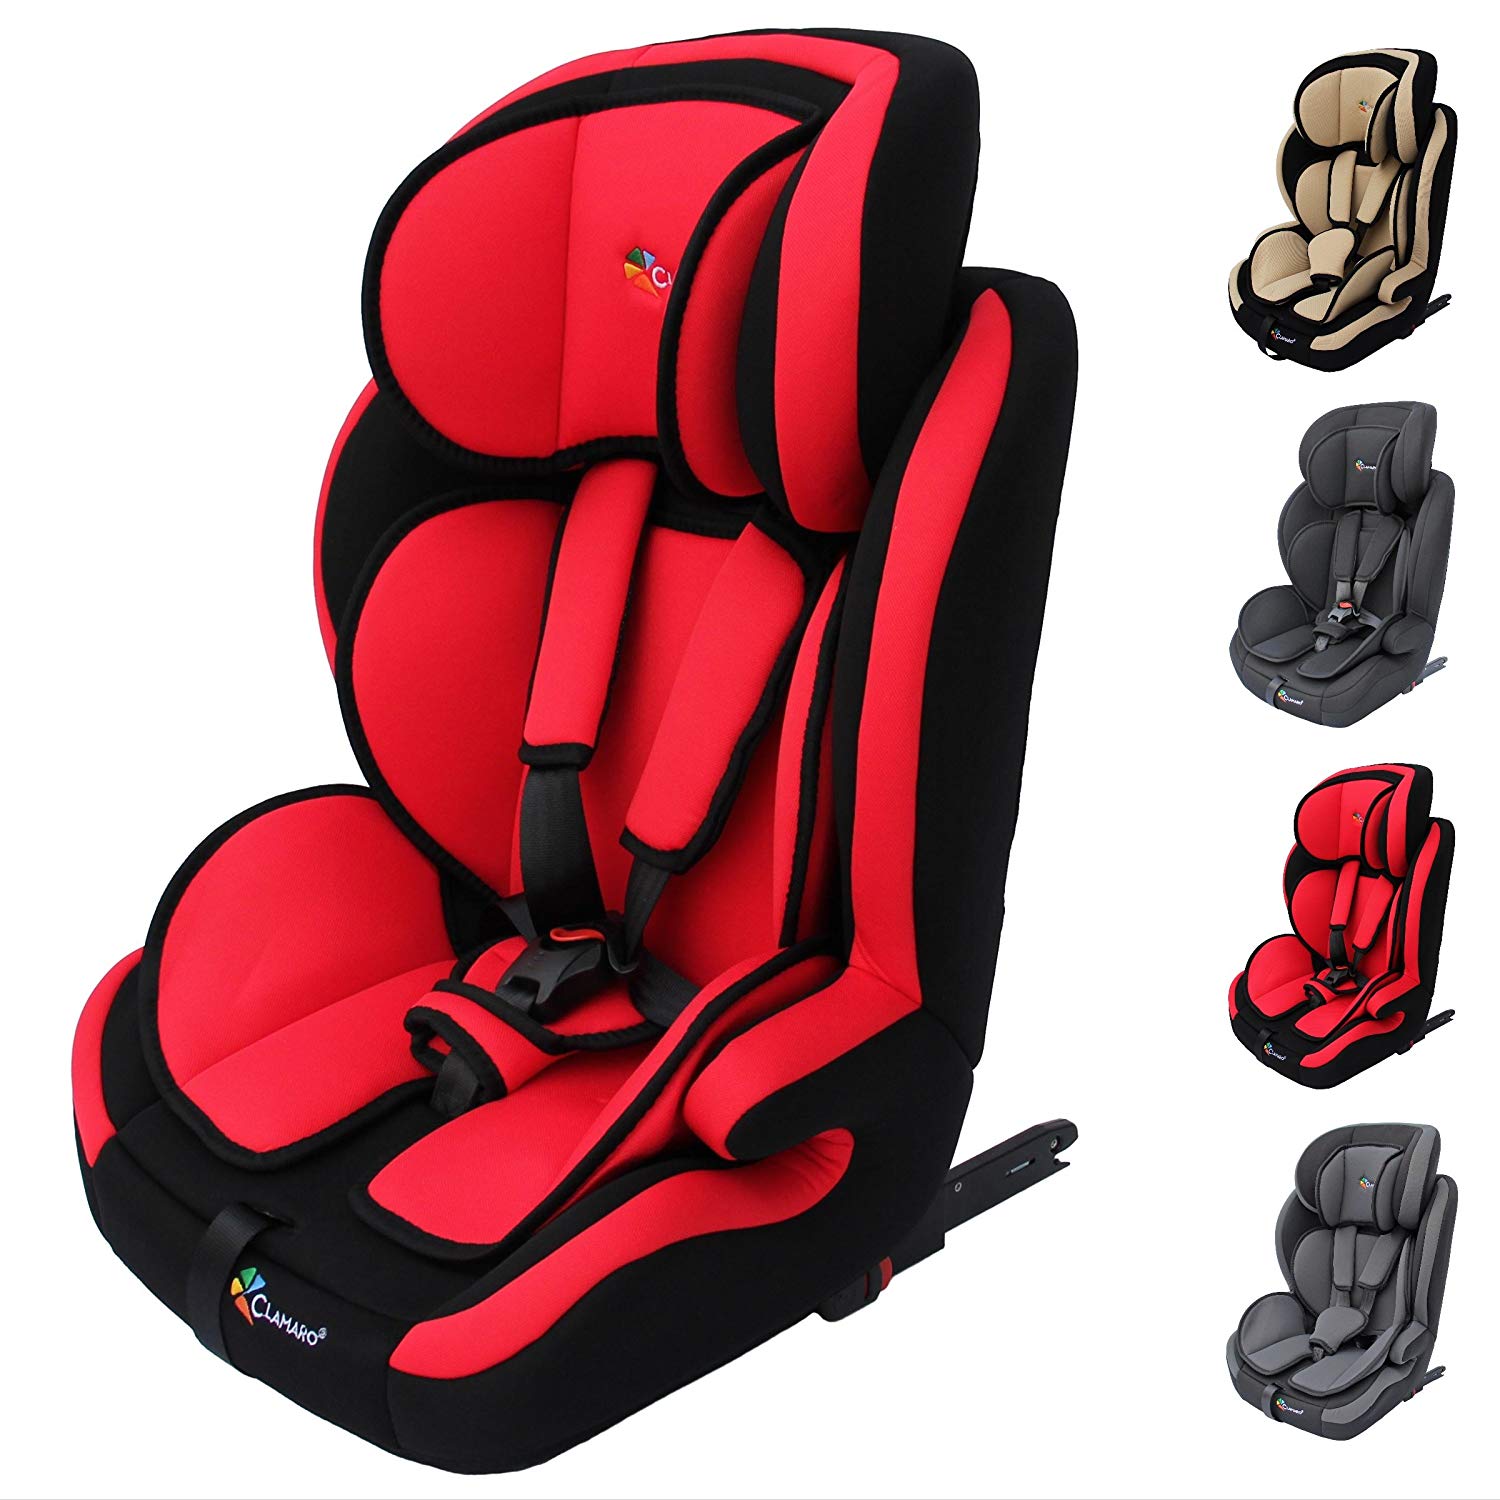 Clamaro Guardian Isofix Child Car Seat 9-36 kg ISOFIX Grows with the Child, Car Seat for Children from 1-12 Years (Group 1I, II, III), Isofix and Top Tether, ECE R44/04 Approval - Red / Black